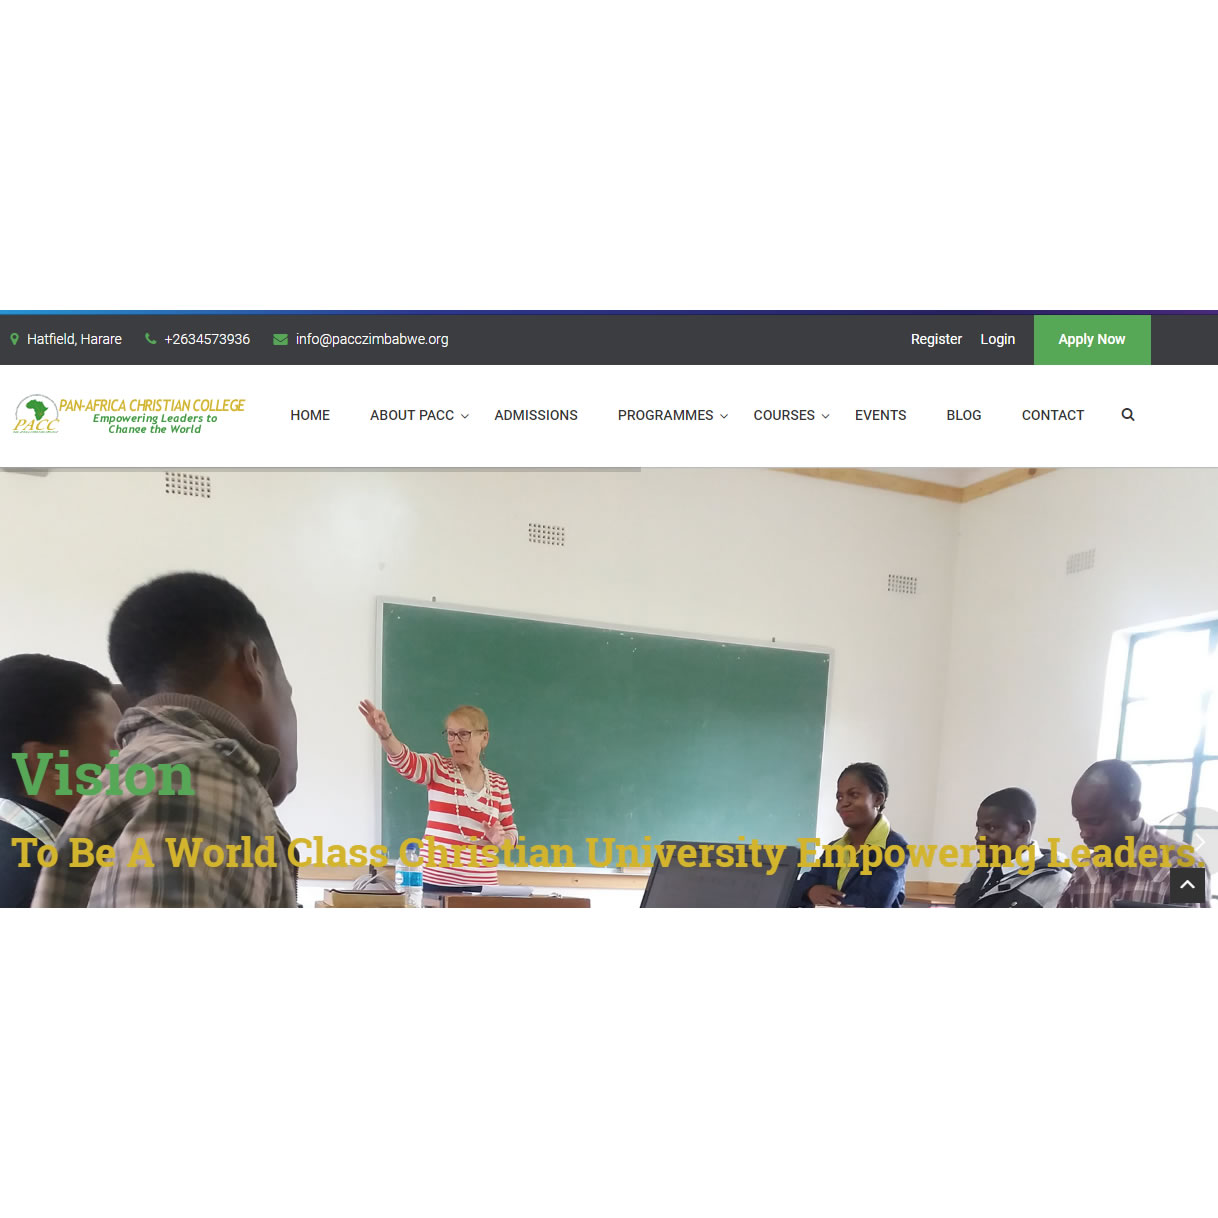 Website design for Pan Africa Christian College, Harare, Zimbabwe